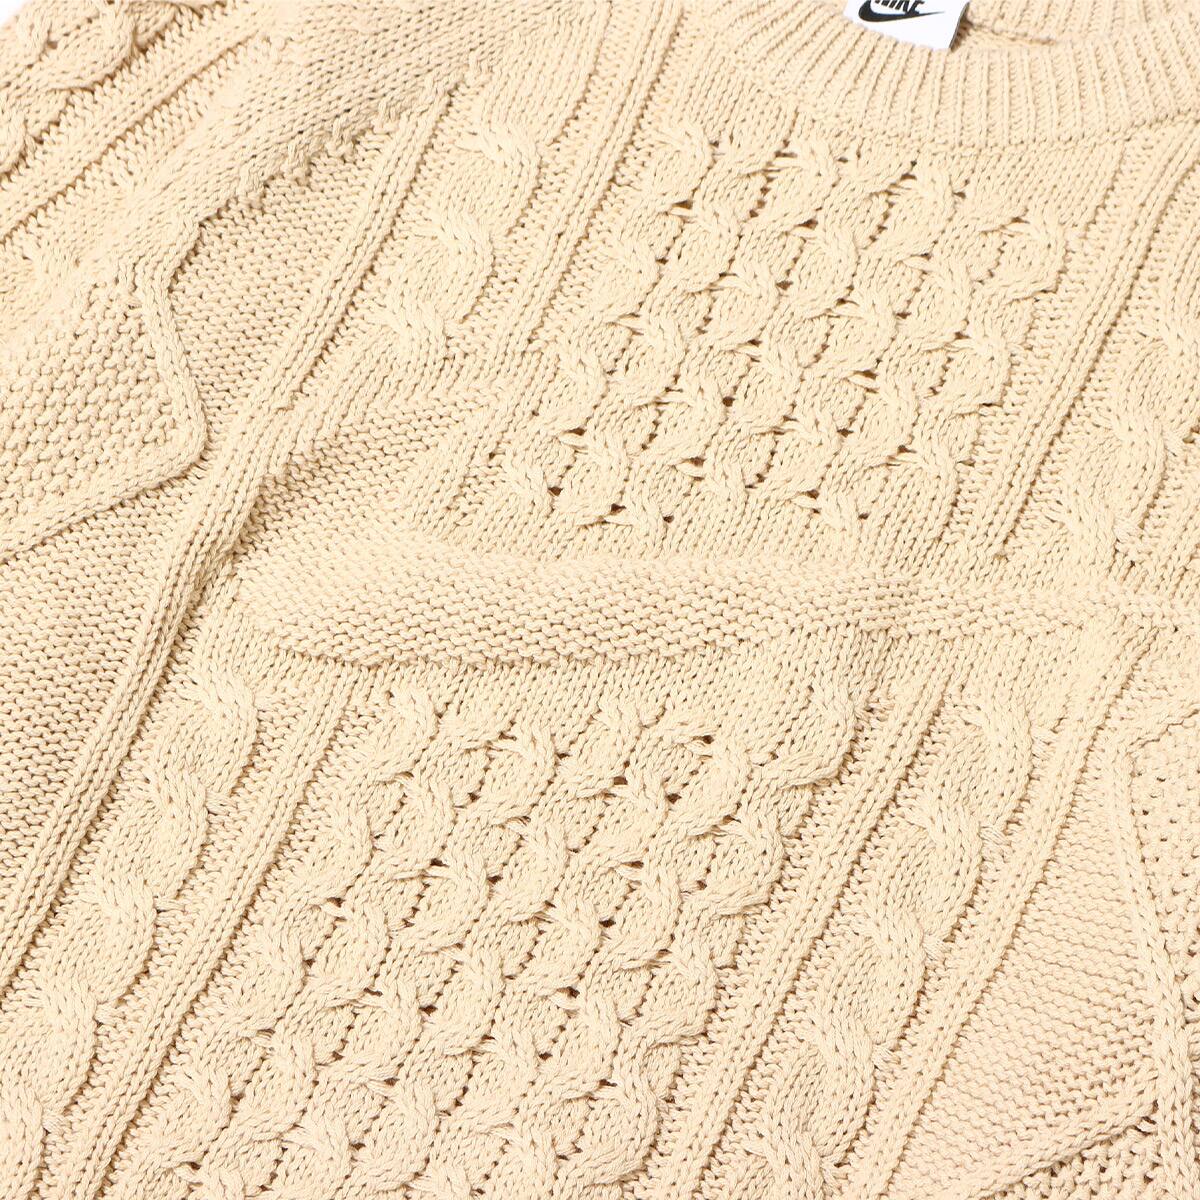 NIKE AS M NL CABLE KNIT SWEATER XLサイズ 新品